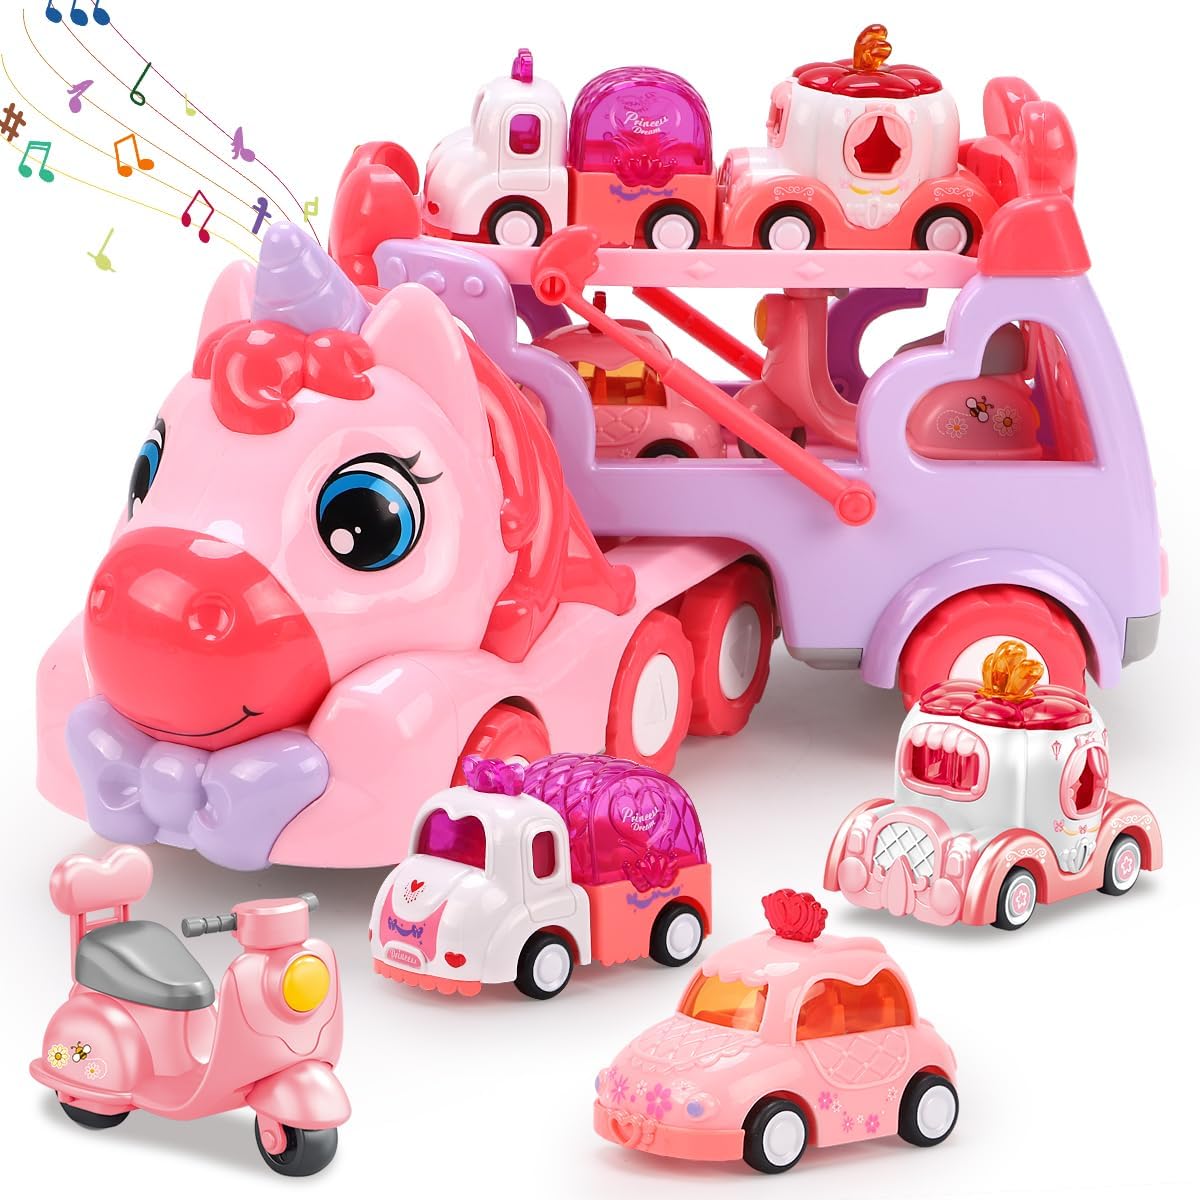 5 in 1 Carrier Truck Car Toys for Girls Toddlers Age 1 2 3+, Unicorn Toy Girl Cars with Music&Light